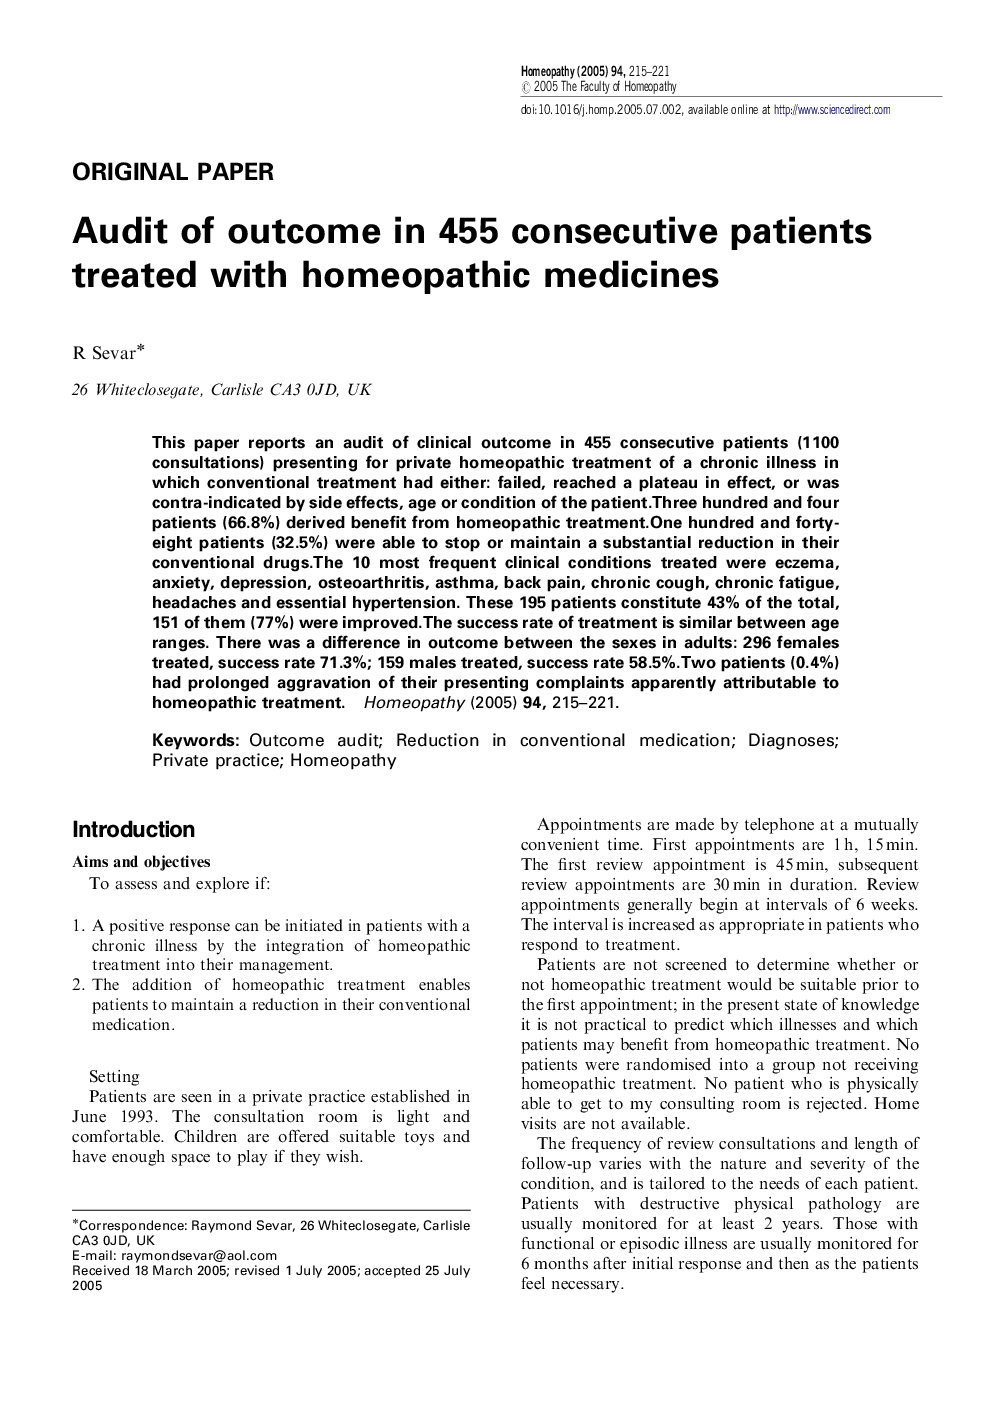 Audit of outcome in 455 consecutive patients treated with homeopathic medicines